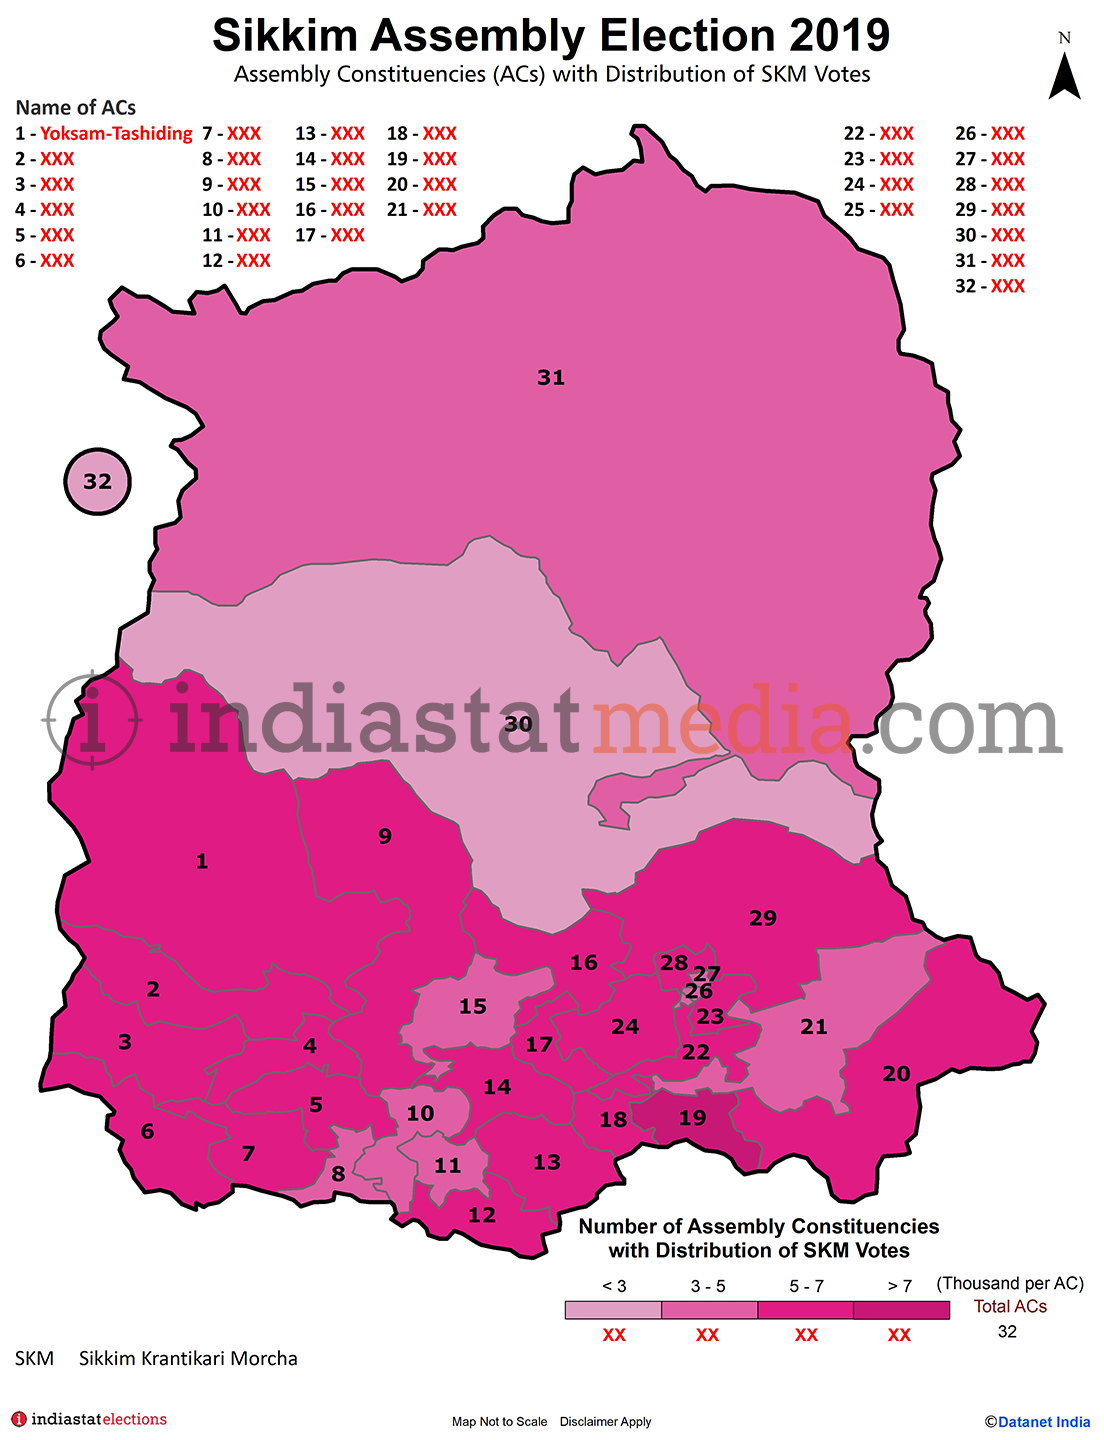 Distribution of SKM Votes by Constituencies in Sikkim (Assembly Election - 2019)